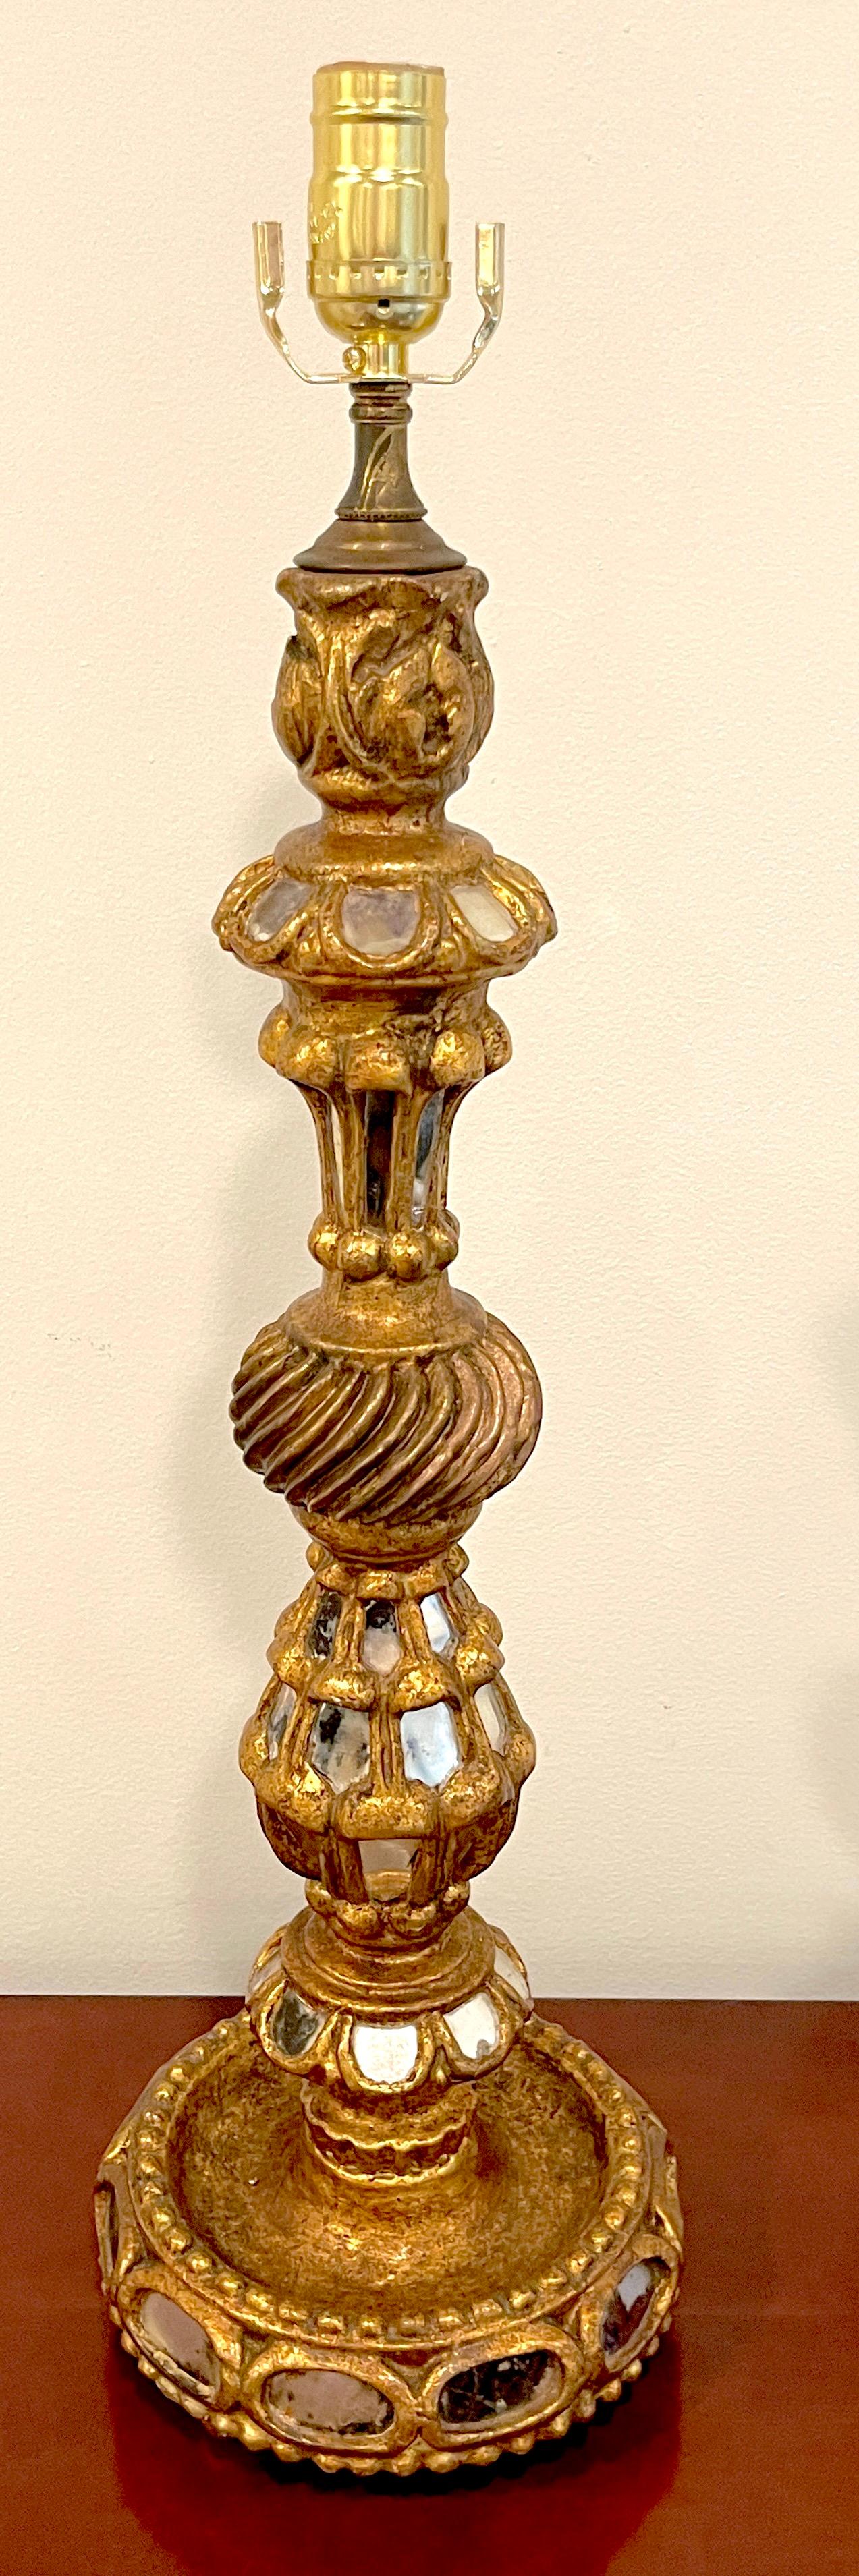 Spanish Colonial giltwood & mirror candlestick, now as a lamp.
Spain, circa 1960s.

A nice example, finely carved and gilt, of tall undulating candlestick form, with numerous inlays of mosaic mirror.
Newly rewired. Ready to shade and place.